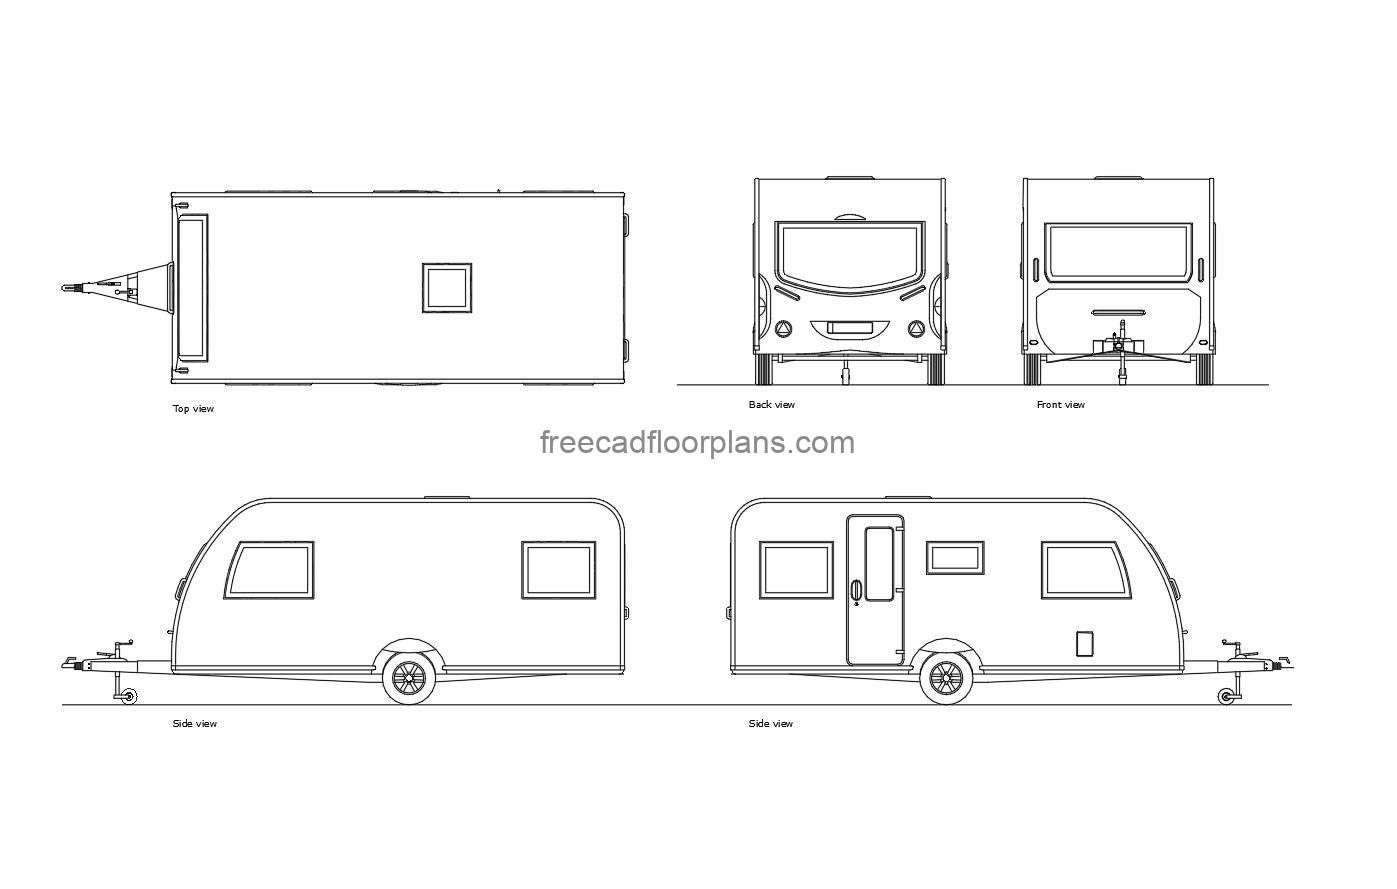 autocad drawing of a standar caravan, plan and elevation 2d views, dwg file free for download